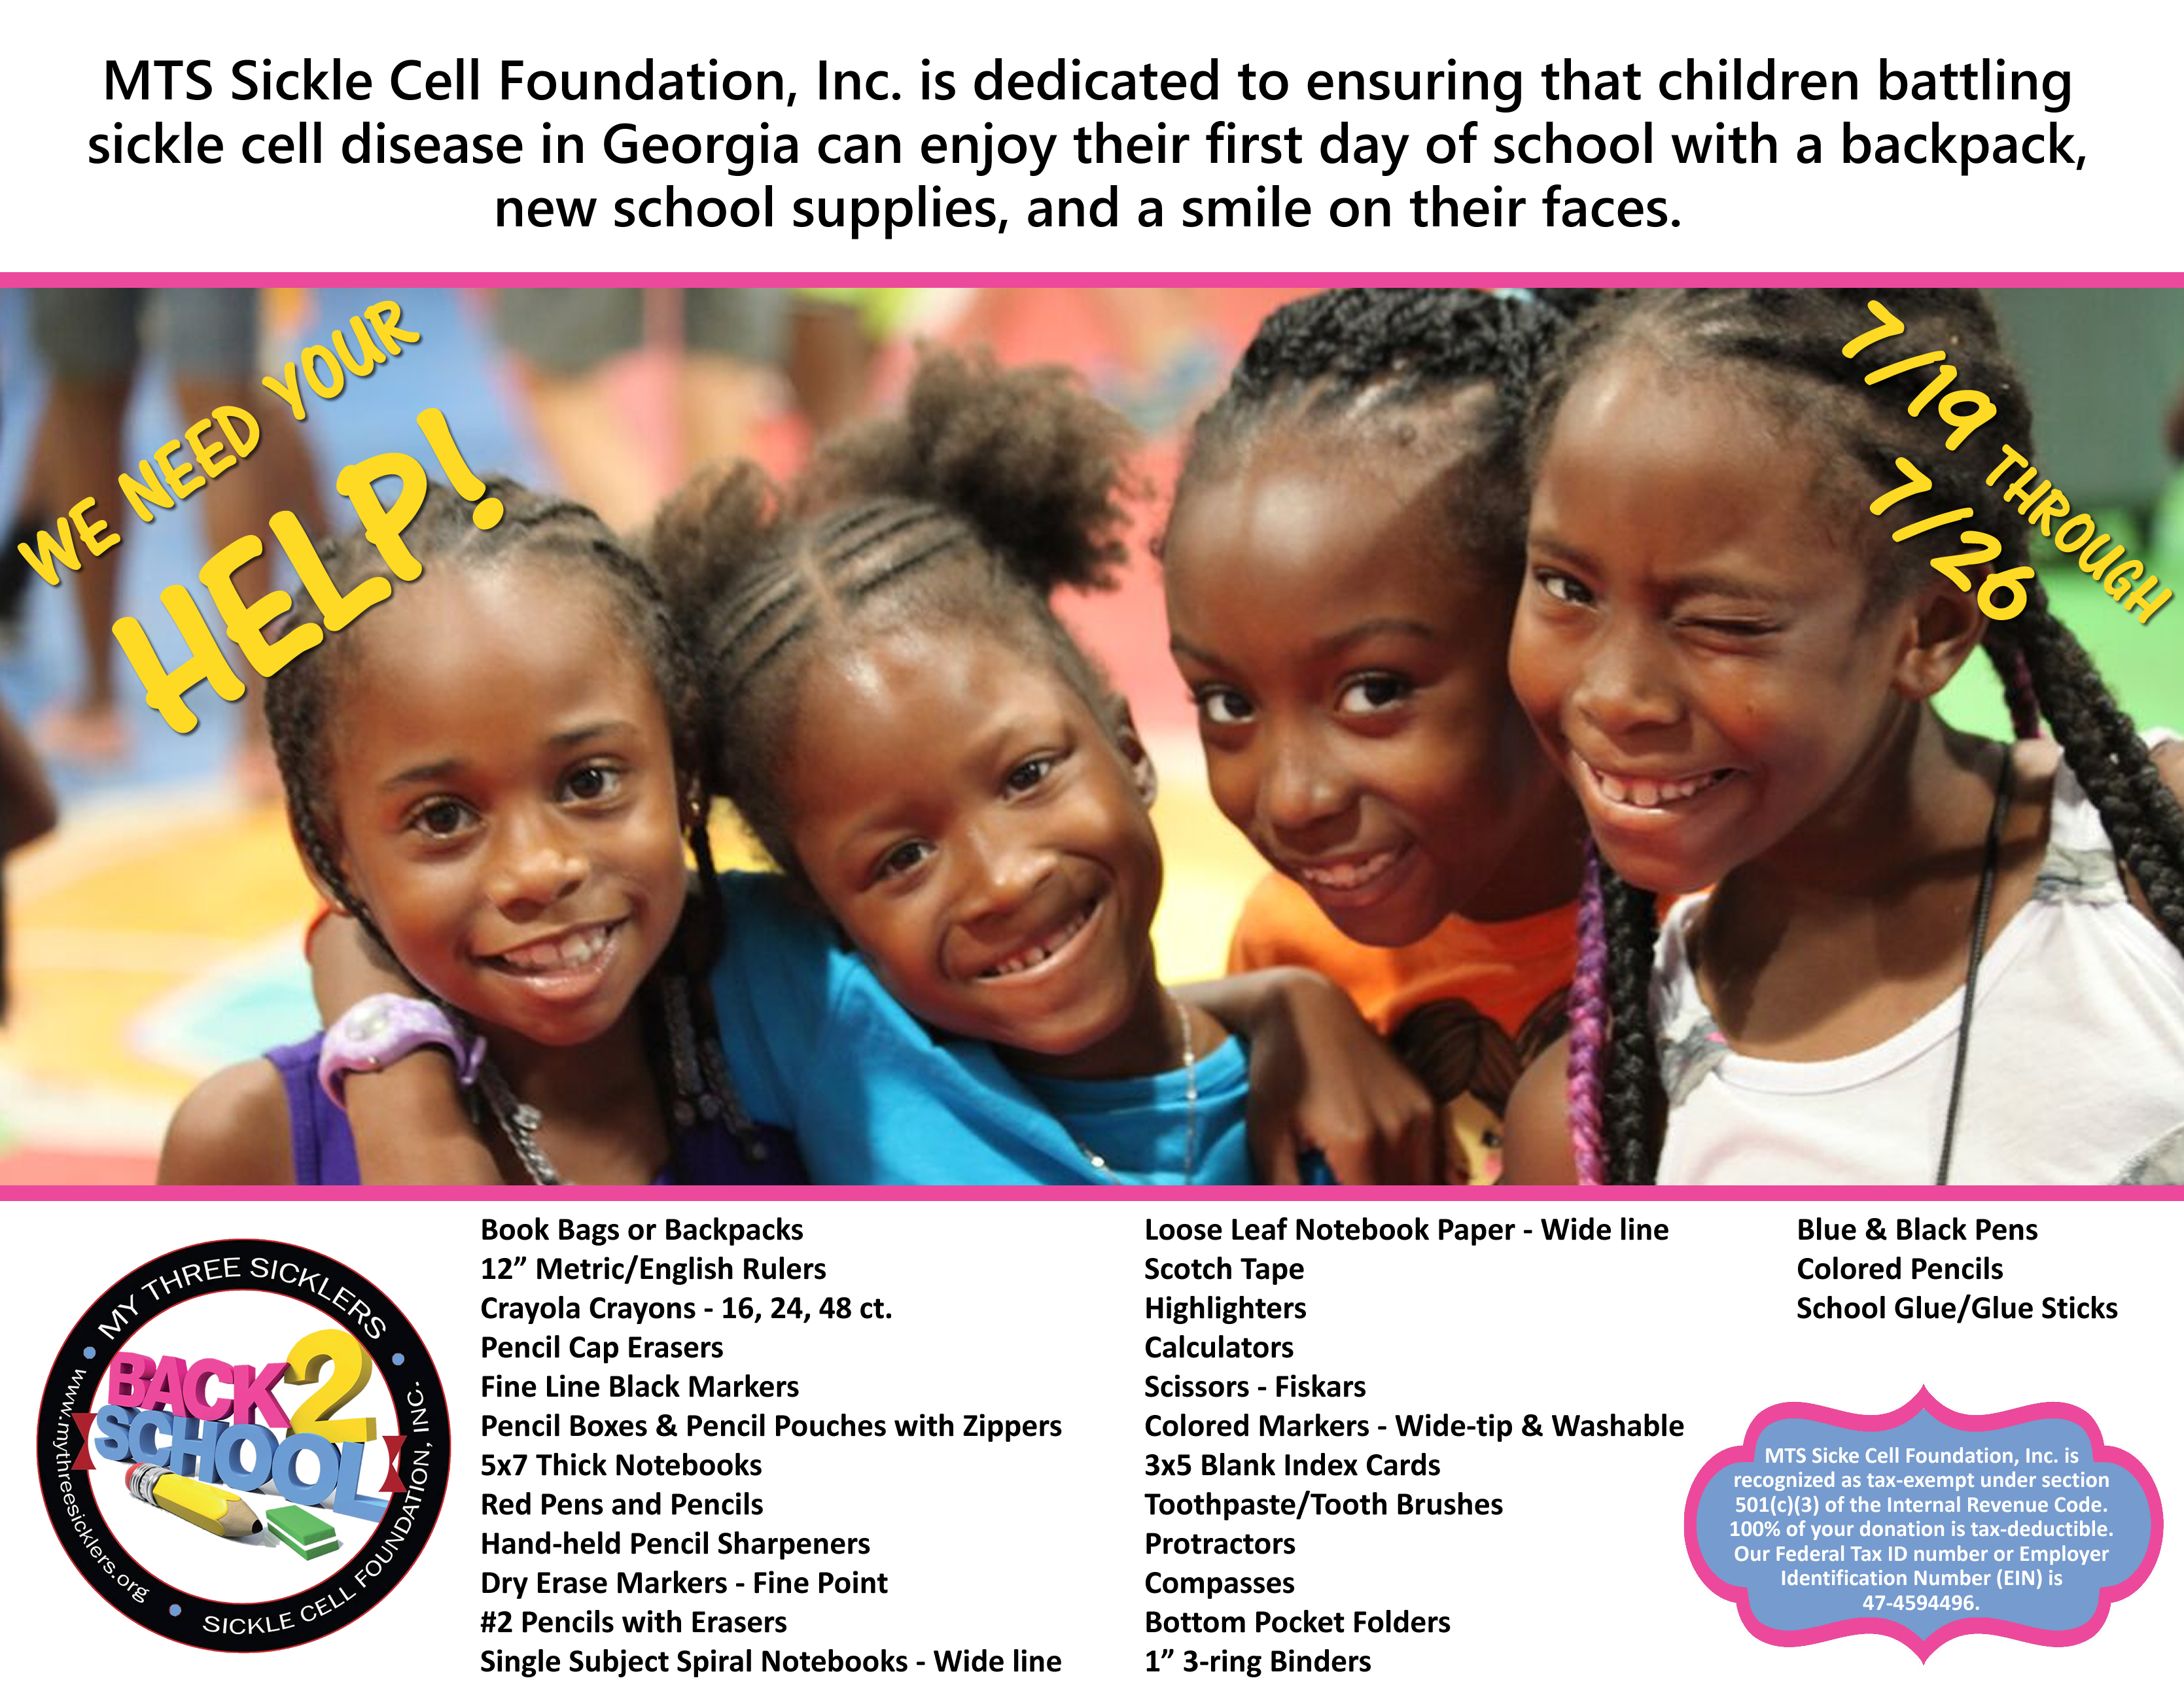 MTS Sickle Cell Foundation Back to School Drive – MTS Sickle Cell